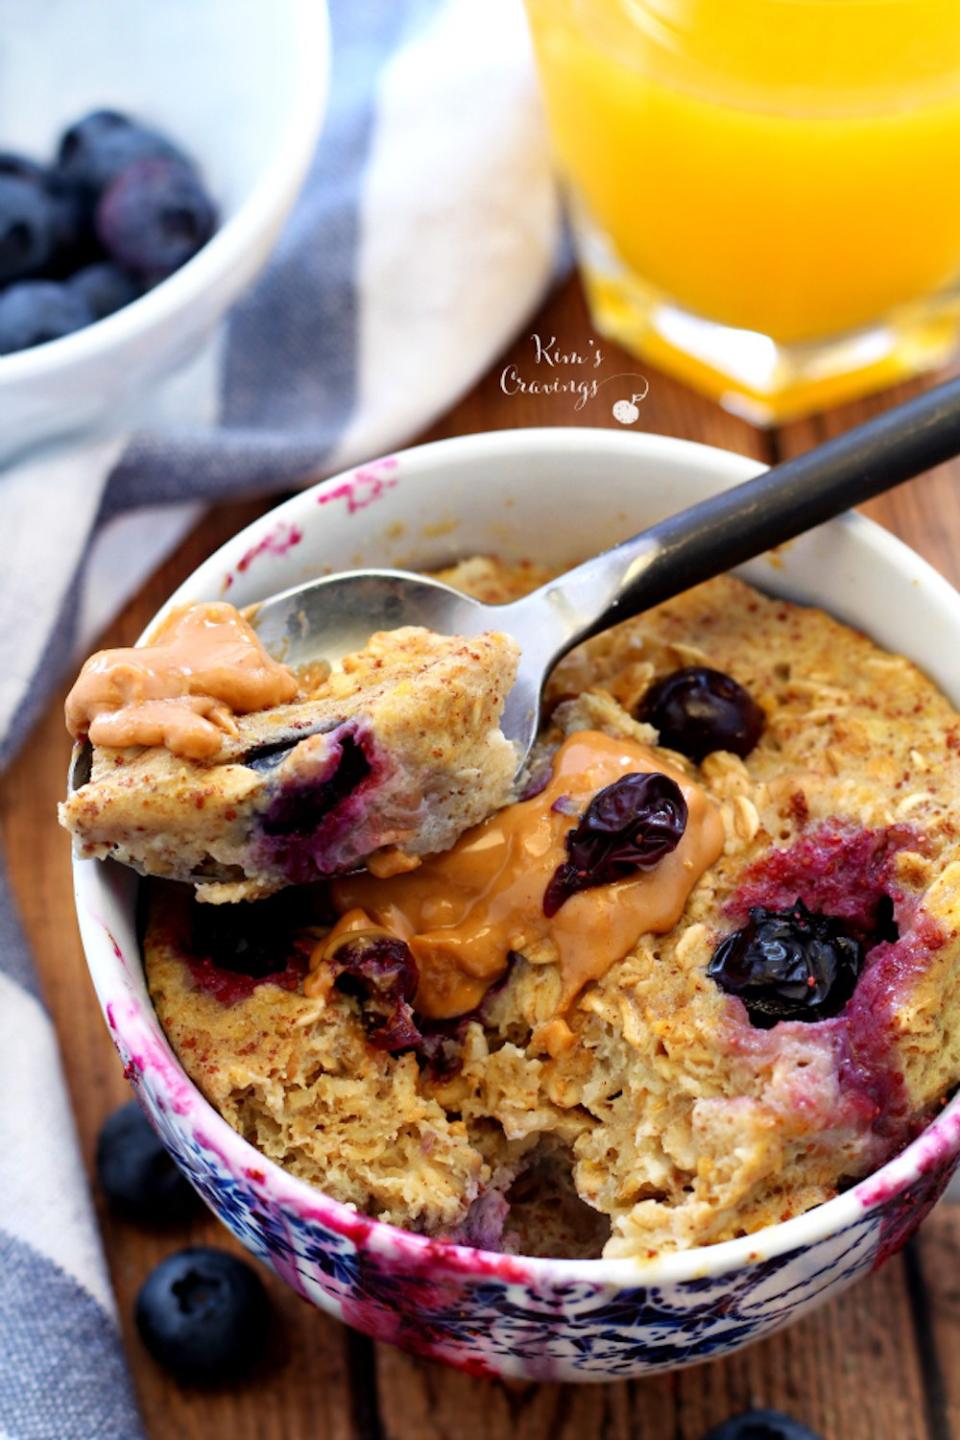 Blueberry Banana "Baked" Oatmeal from Kim's Cravings